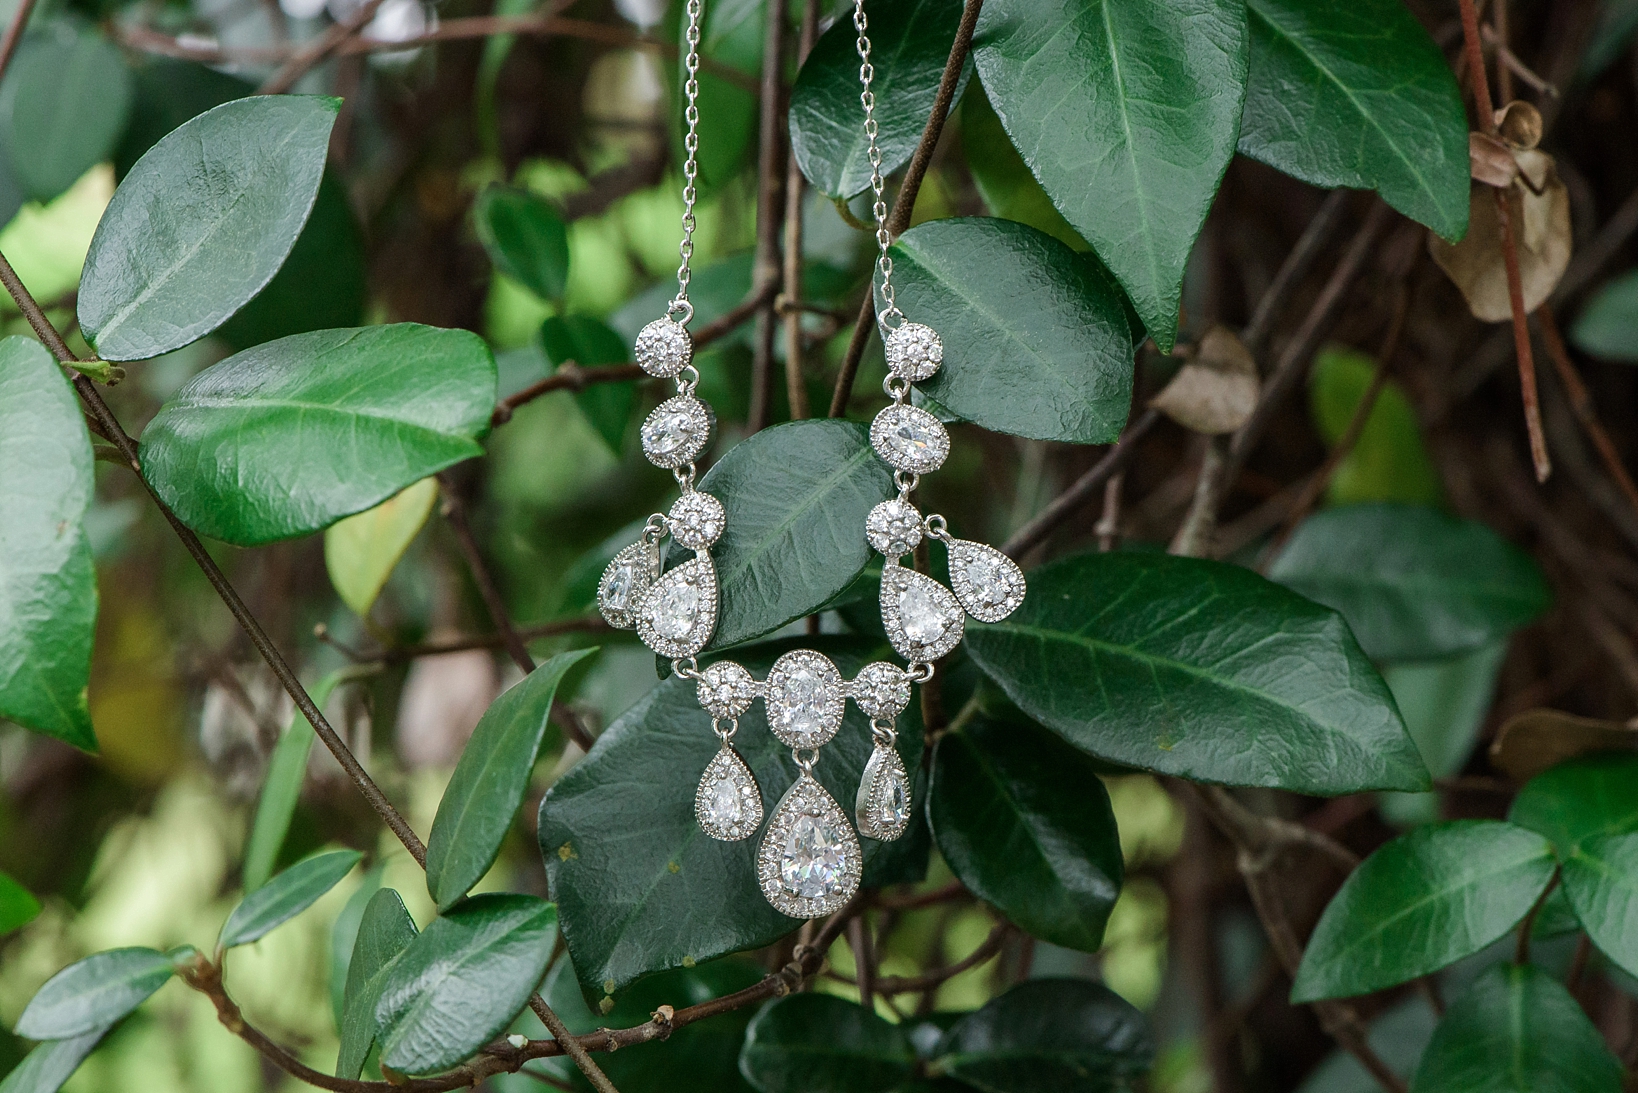 Diamond necklace details hanging on a rustic green background